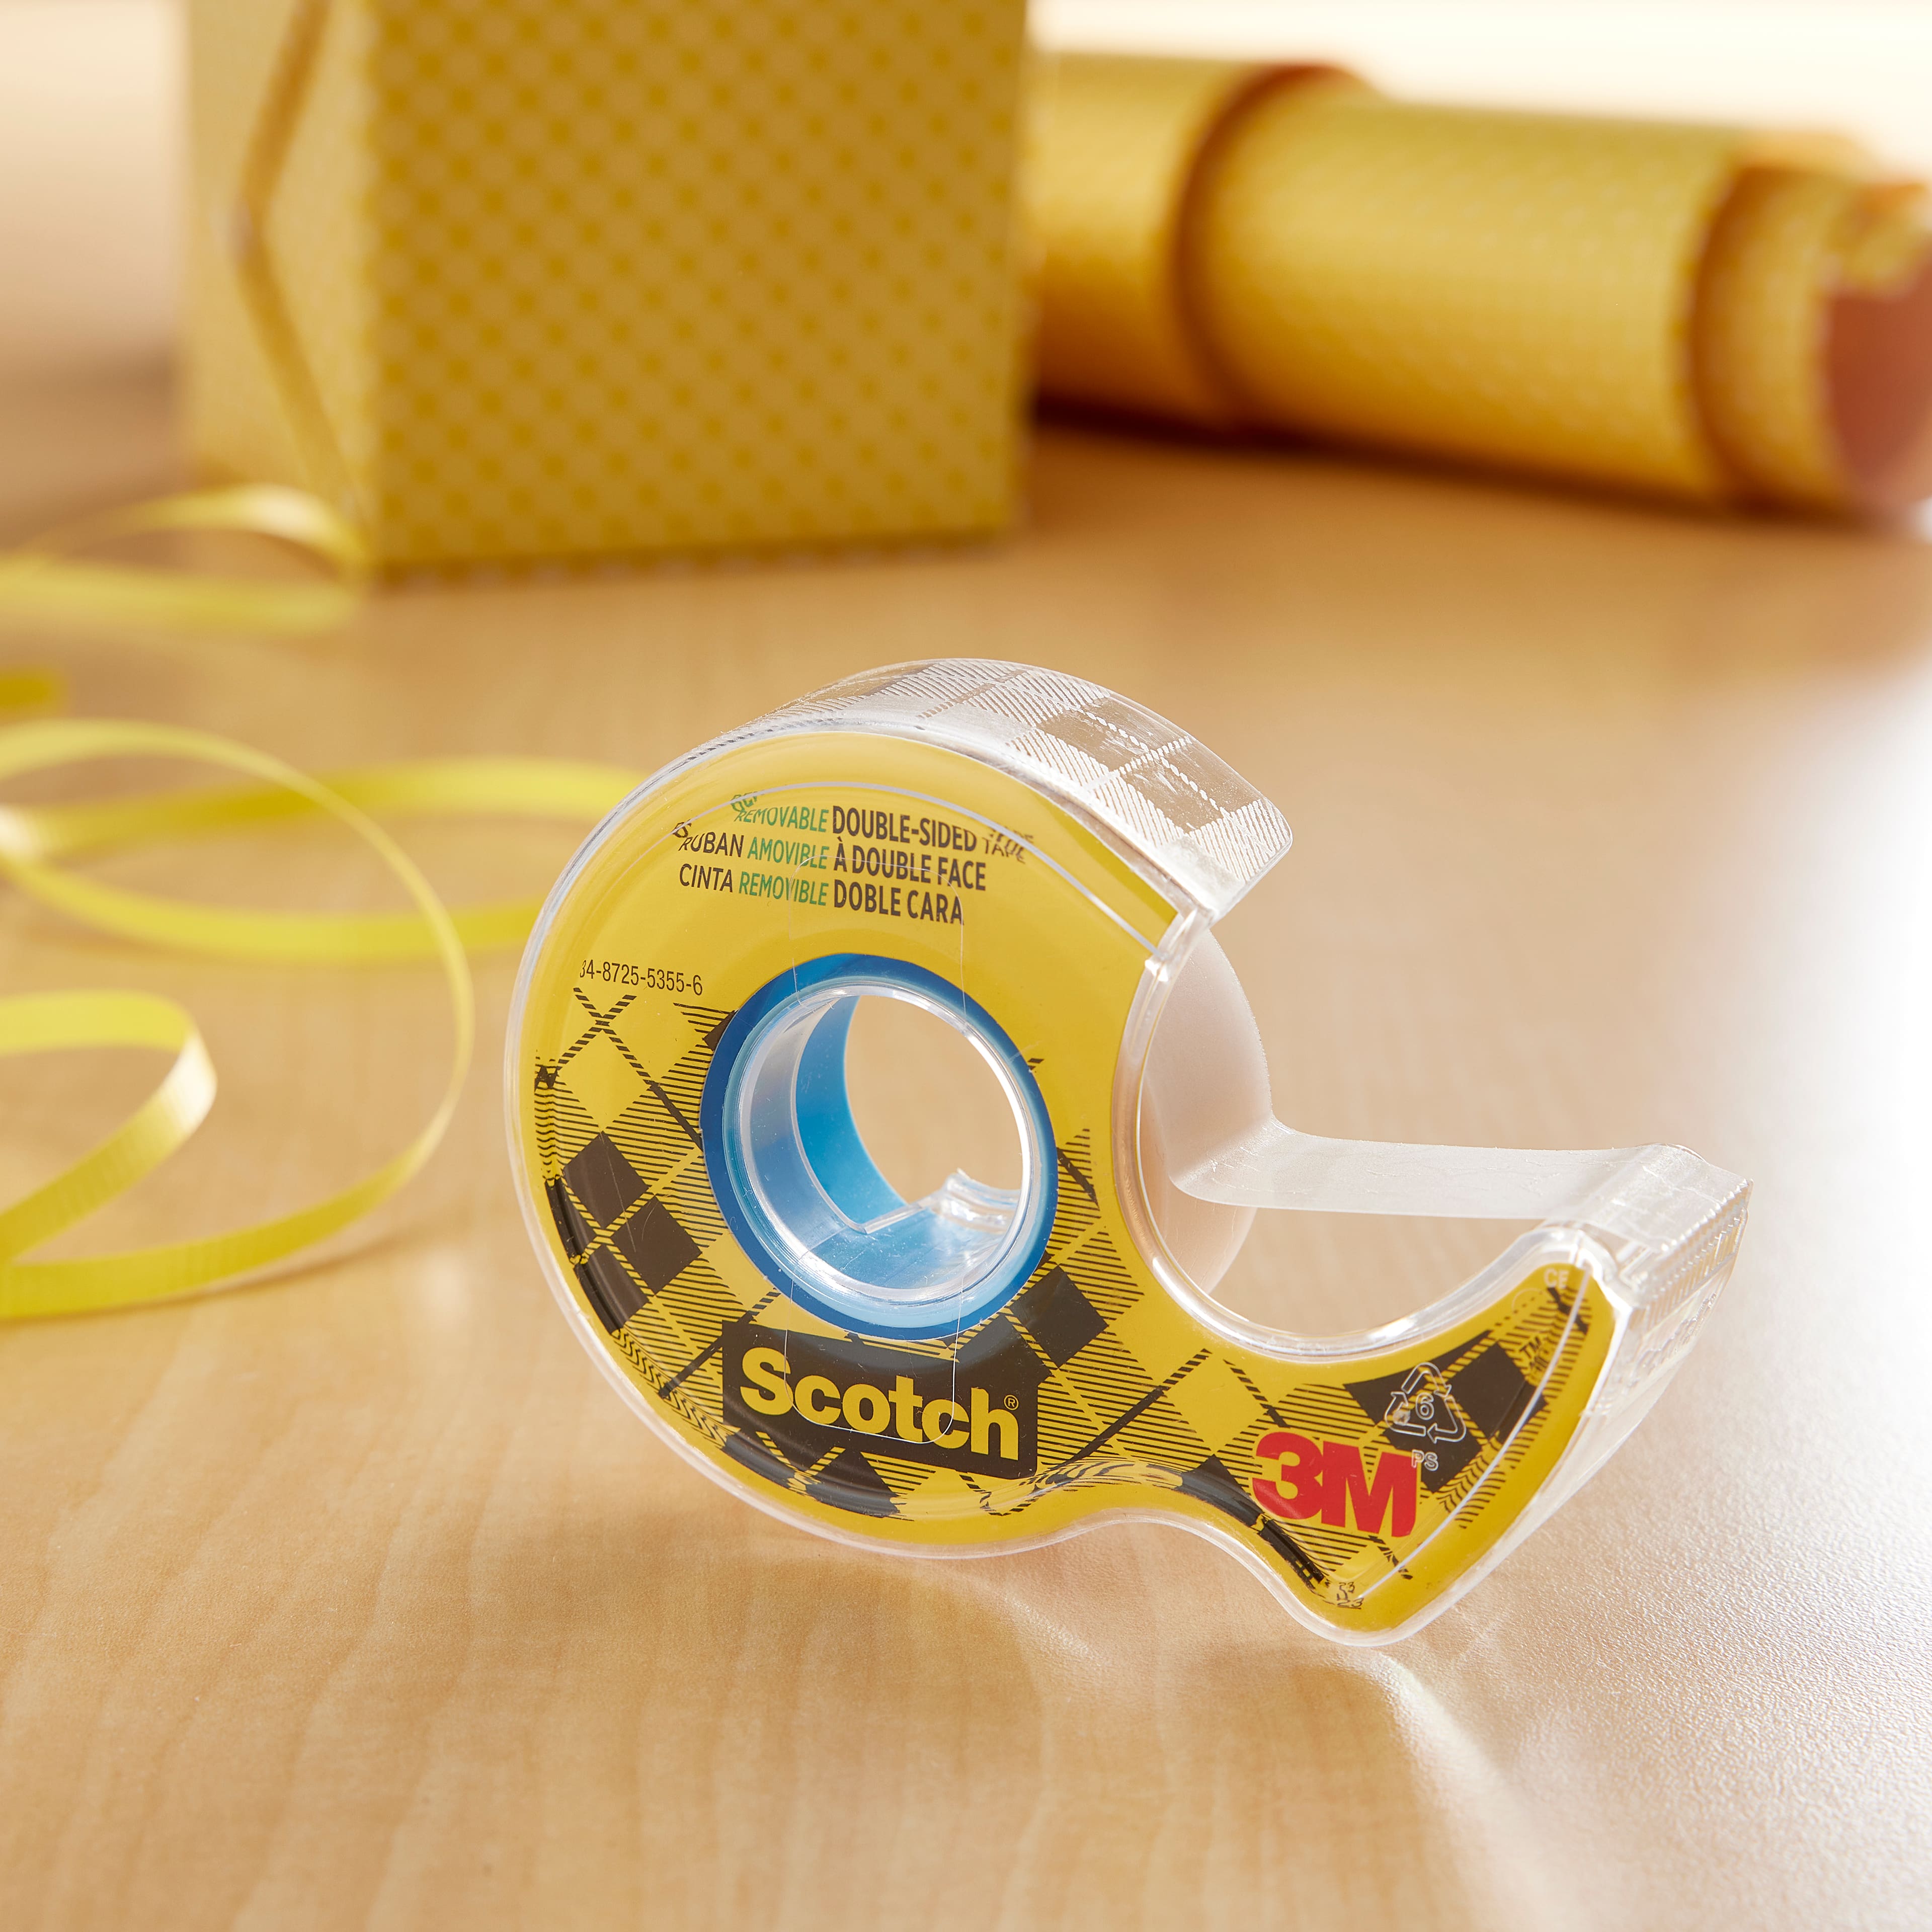 One roll of Scotch Magic Tape - Alternative to Pins for Appliqué